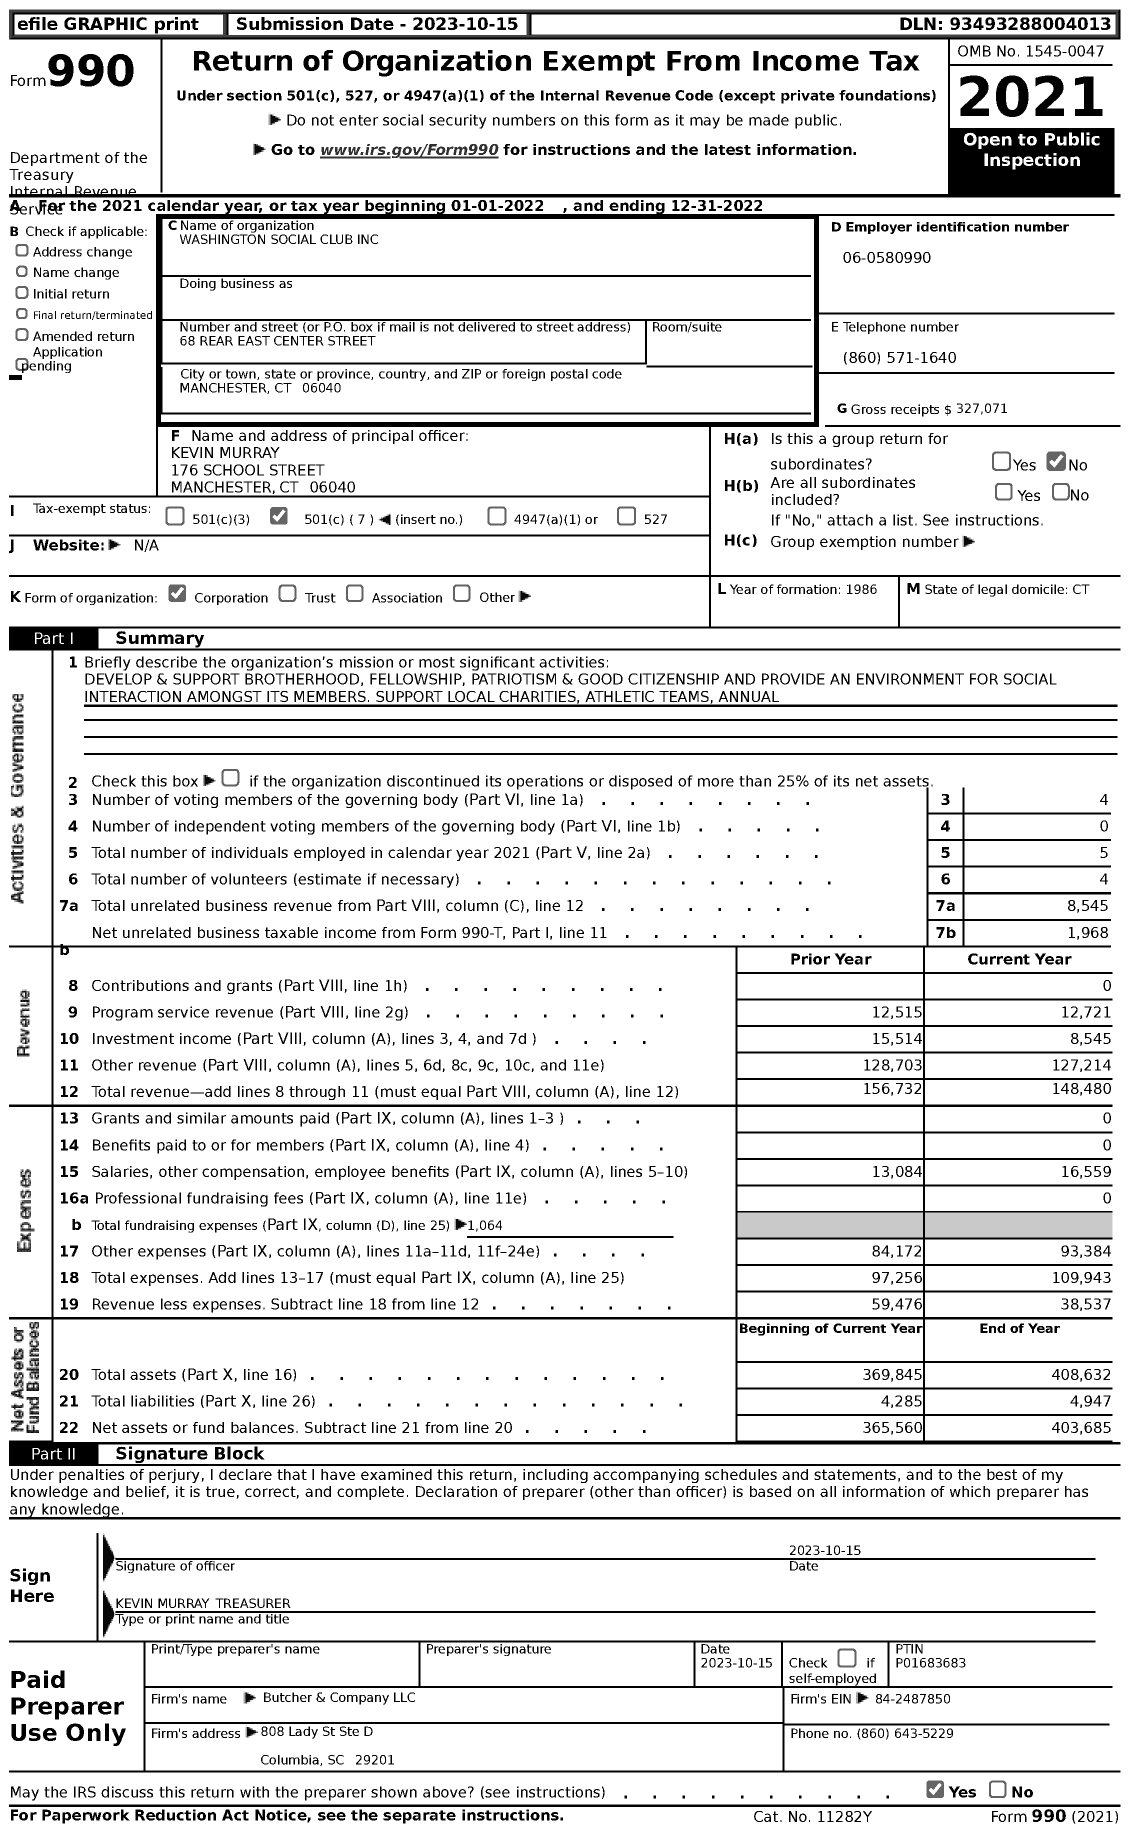 Image of first page of 2022 Form 990 for Washington Social Club